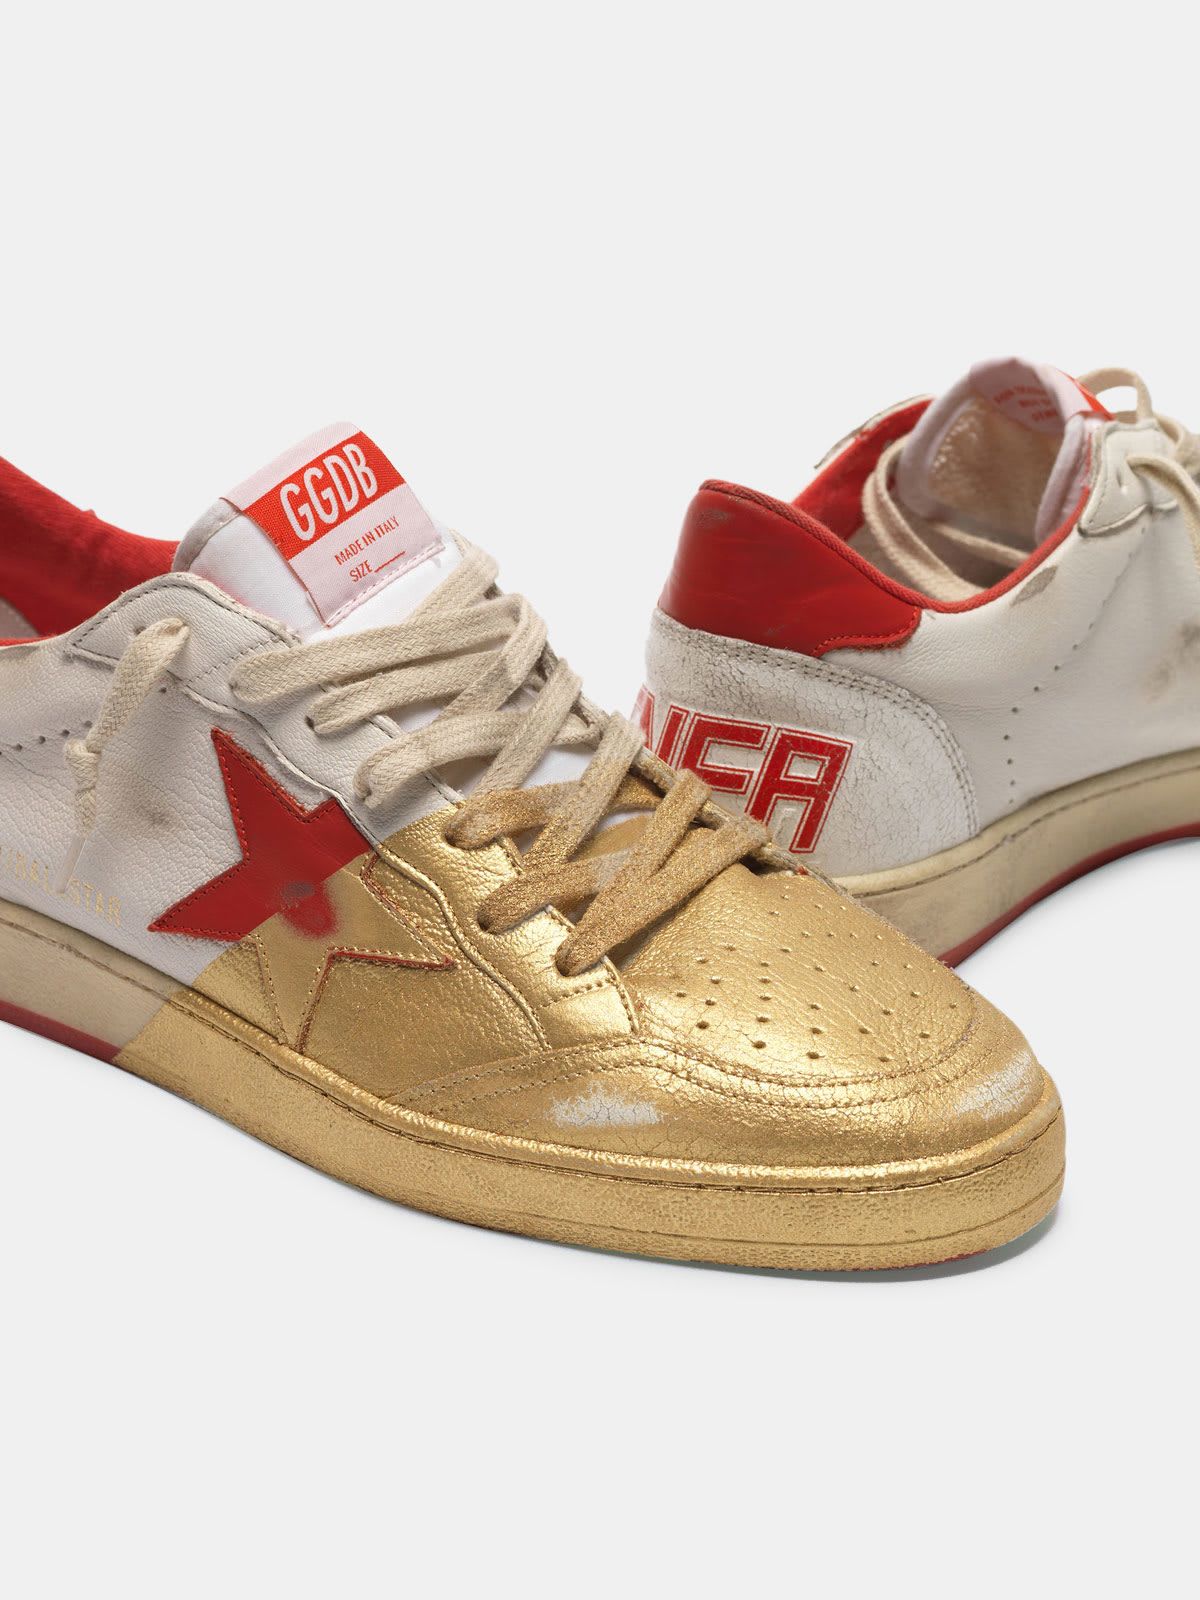 Ball Star sneakers in leather with golden varnish on the front